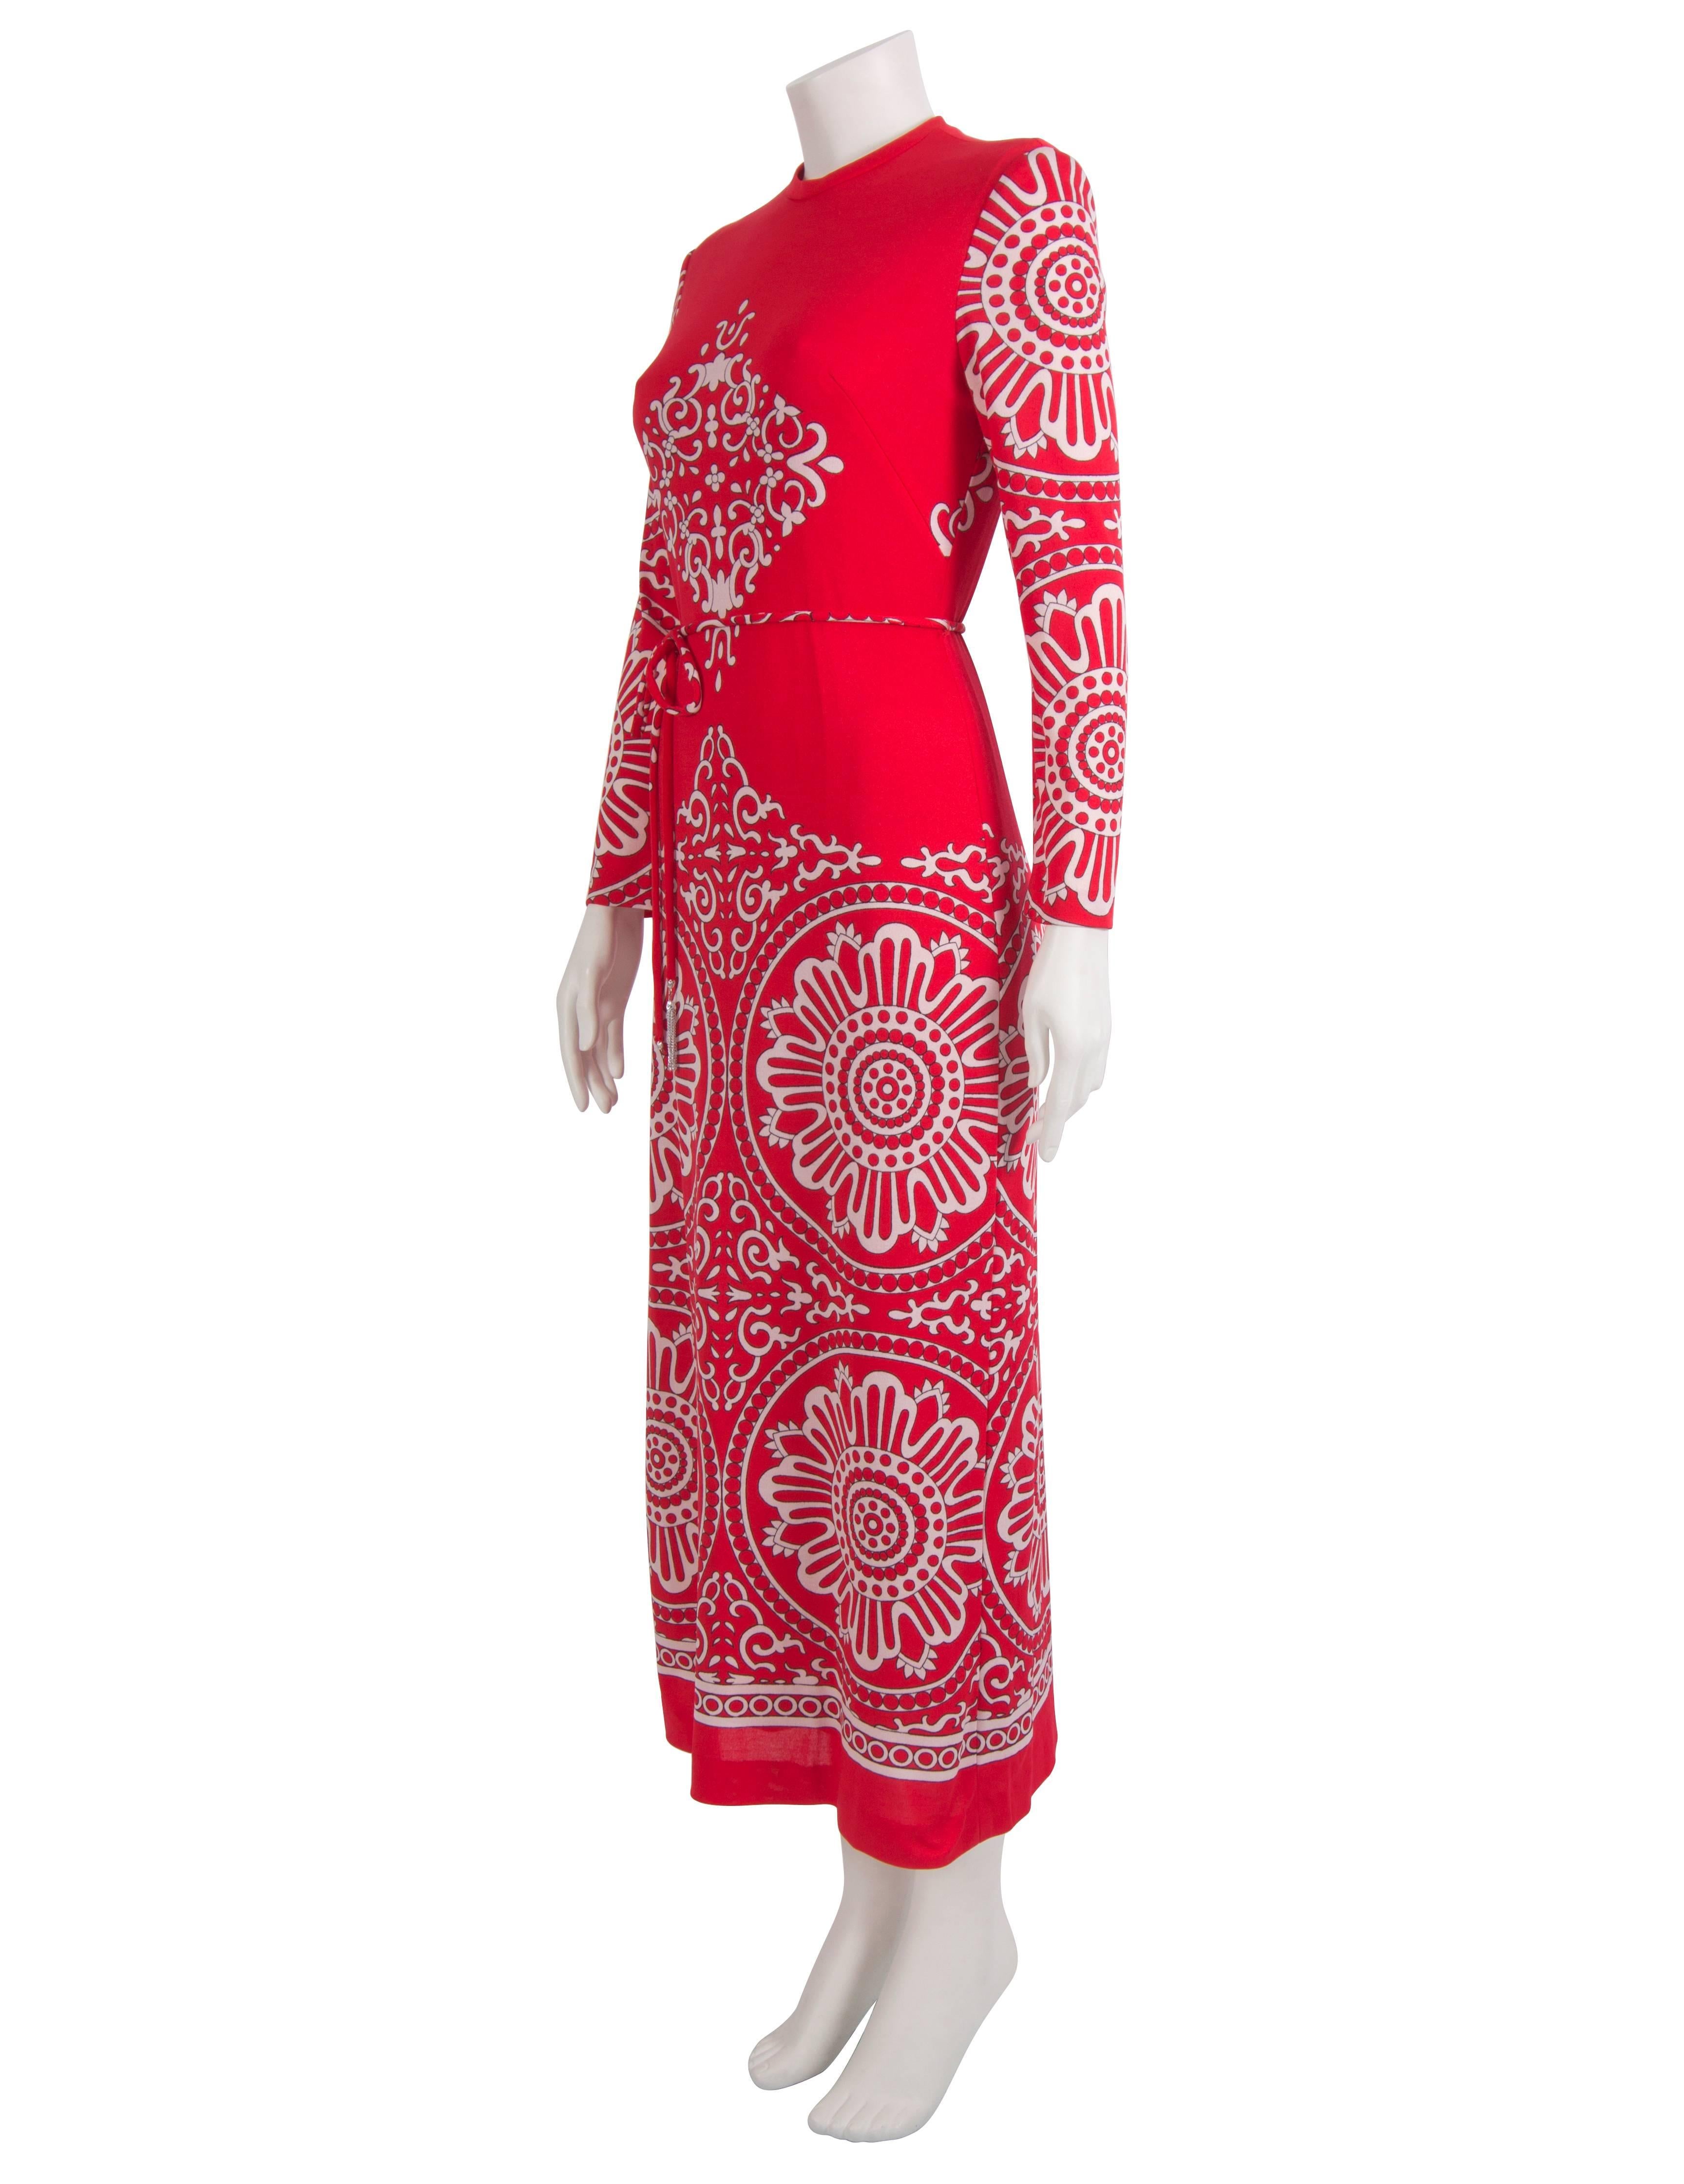 A 1970's red jersey maxi dress featuring a mirrored mandala print throughout. The dress closes with a zip at the centre back and is fully lined with a red mesh fabric. The dress features a belt with metal tassels (one missing - pictured). Excellent